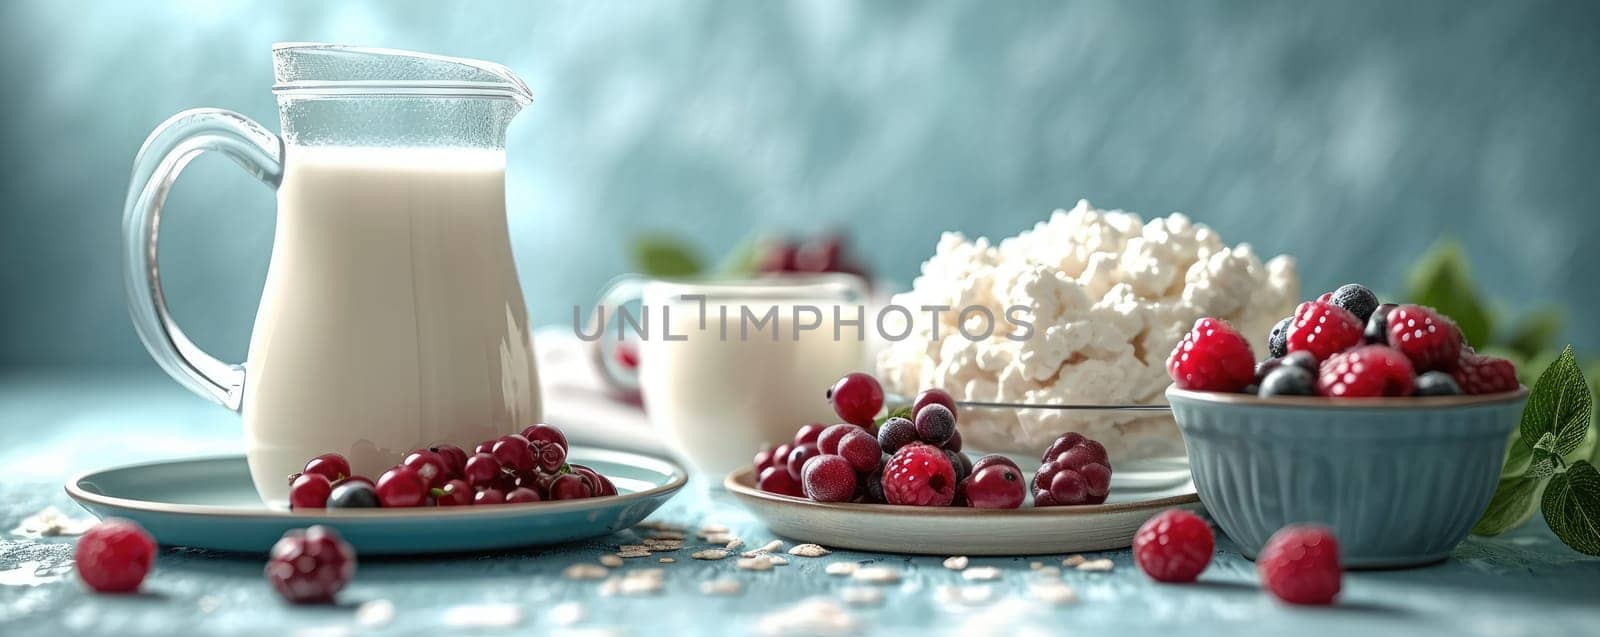 Hearty breakfast: jug of milk, cottage cheese and fresh berries on a blue background